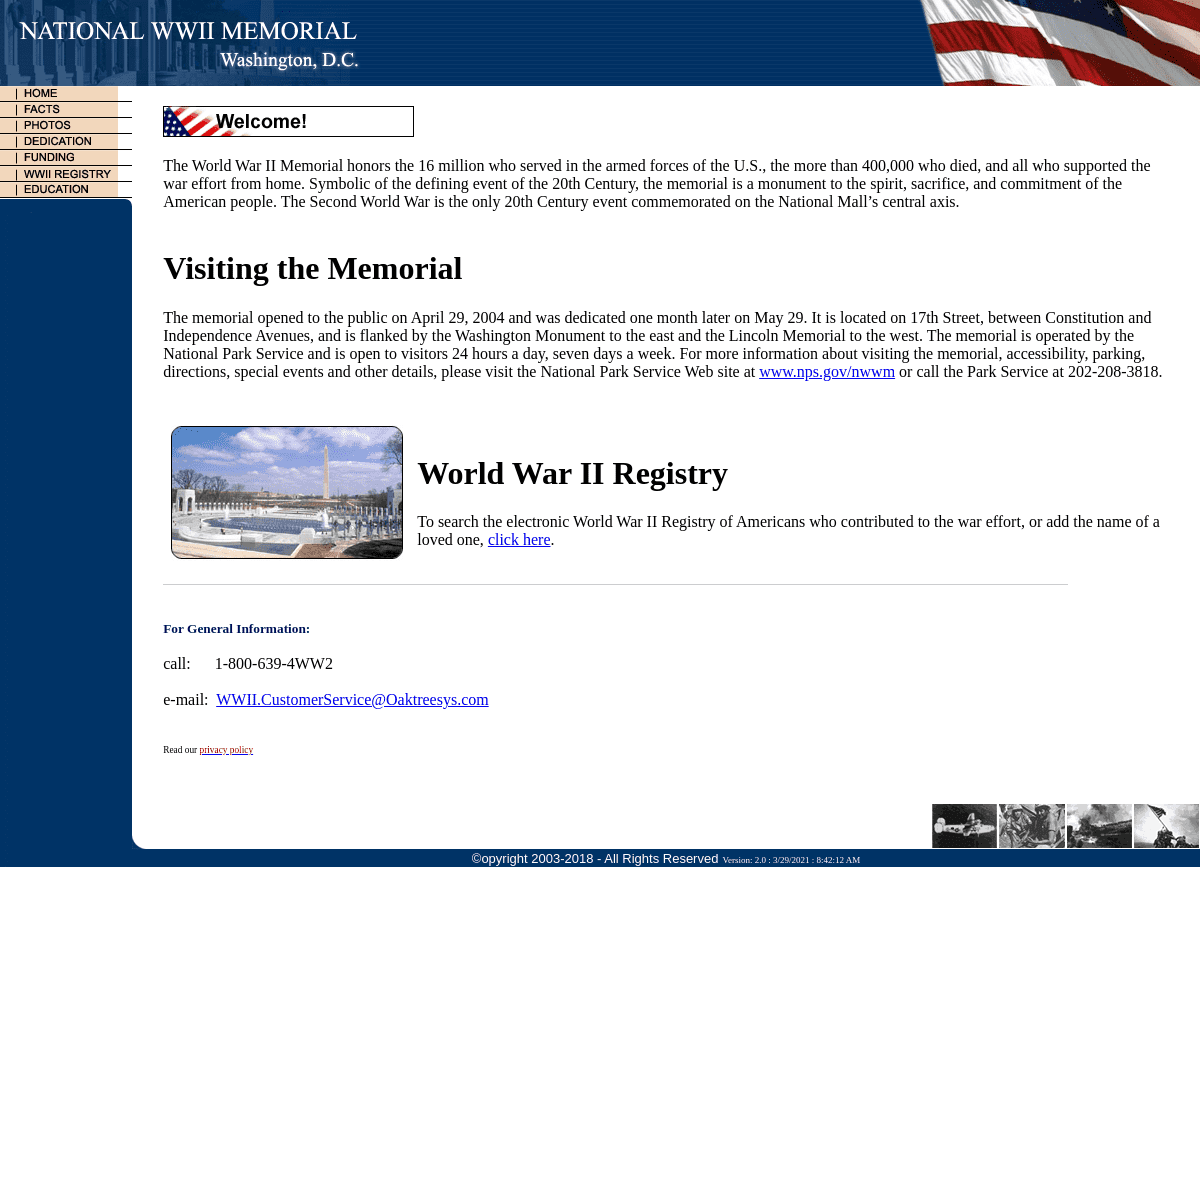 A complete backup of https://wwiimemorial.com